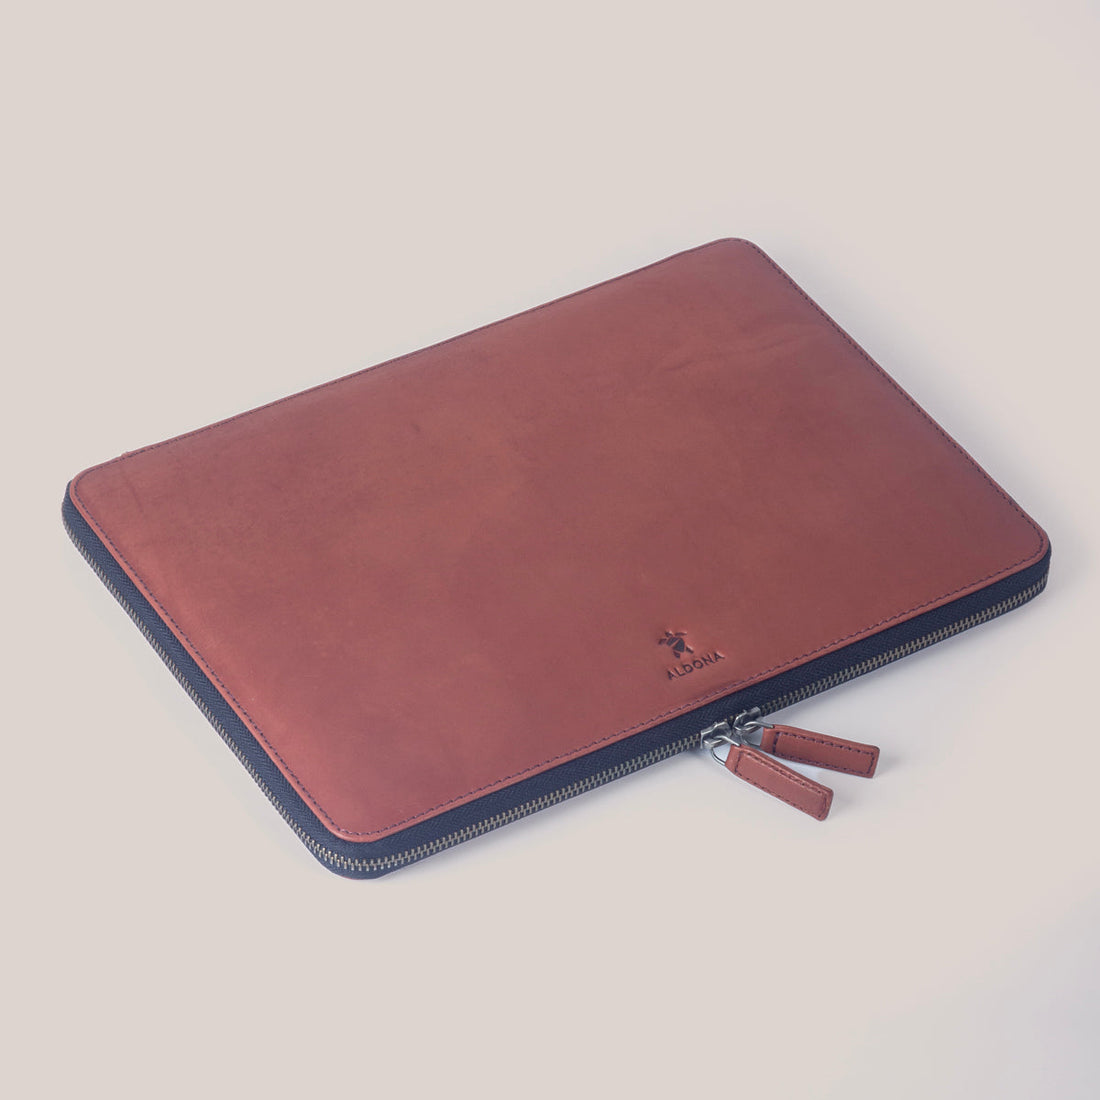 DELL XPS 15 Zippered Laptop Case - Burnt Tobacco